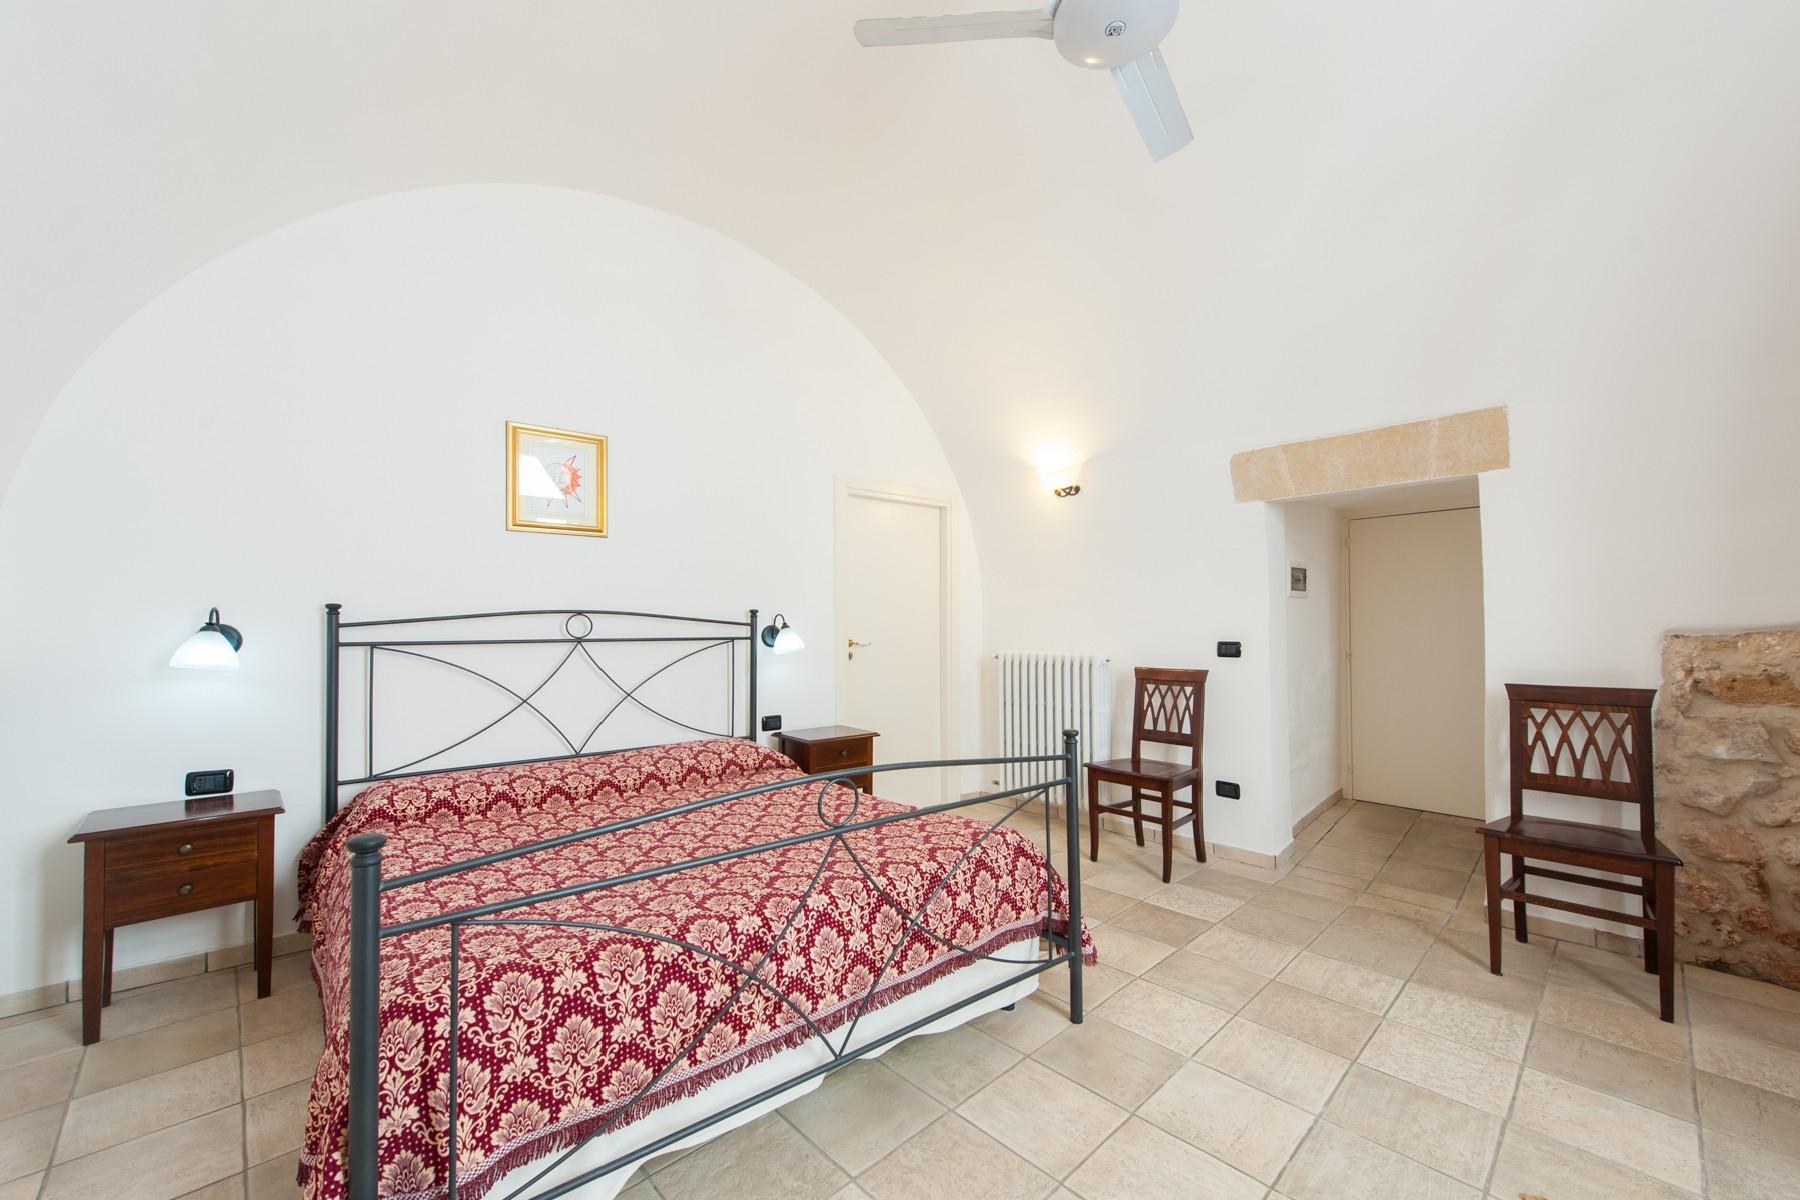 Perfectly renovated Palazzetto in the historic center of Parabita - 12